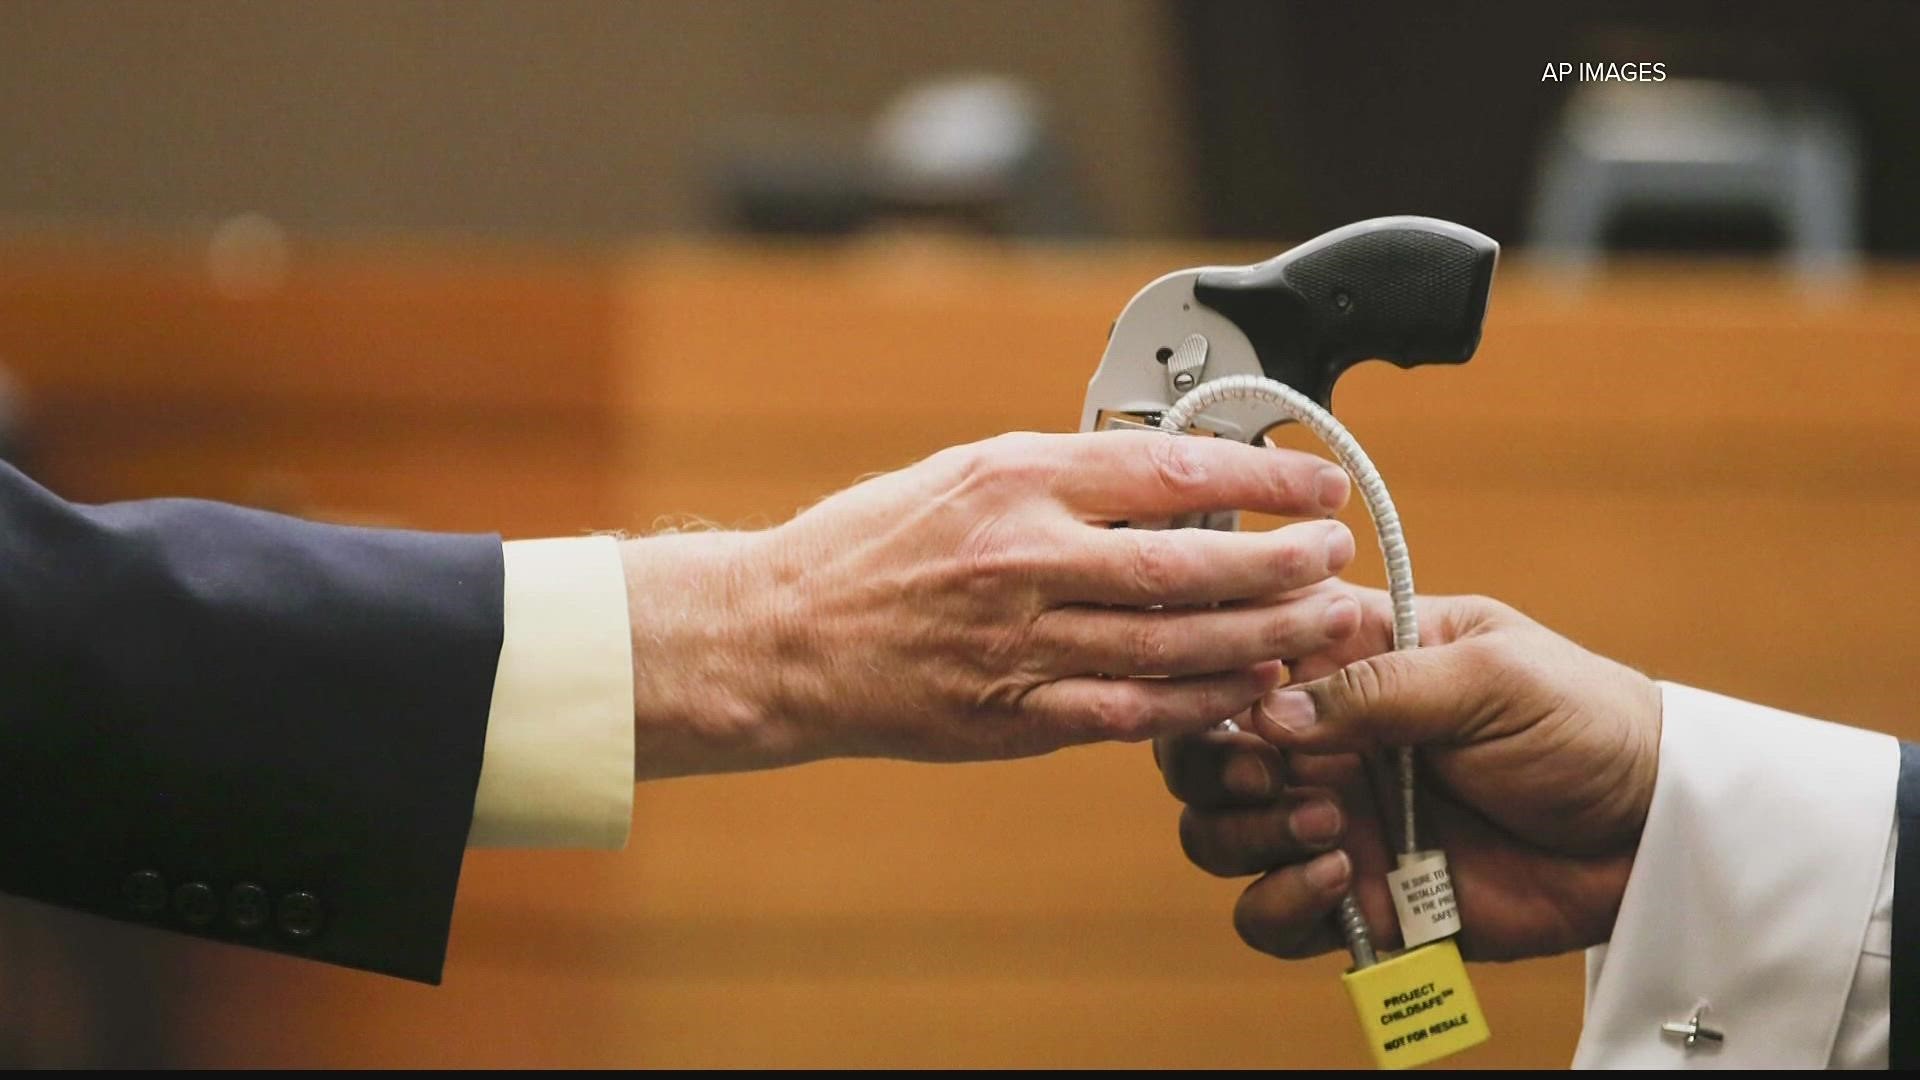 The gun was a central part of McIver's trial.